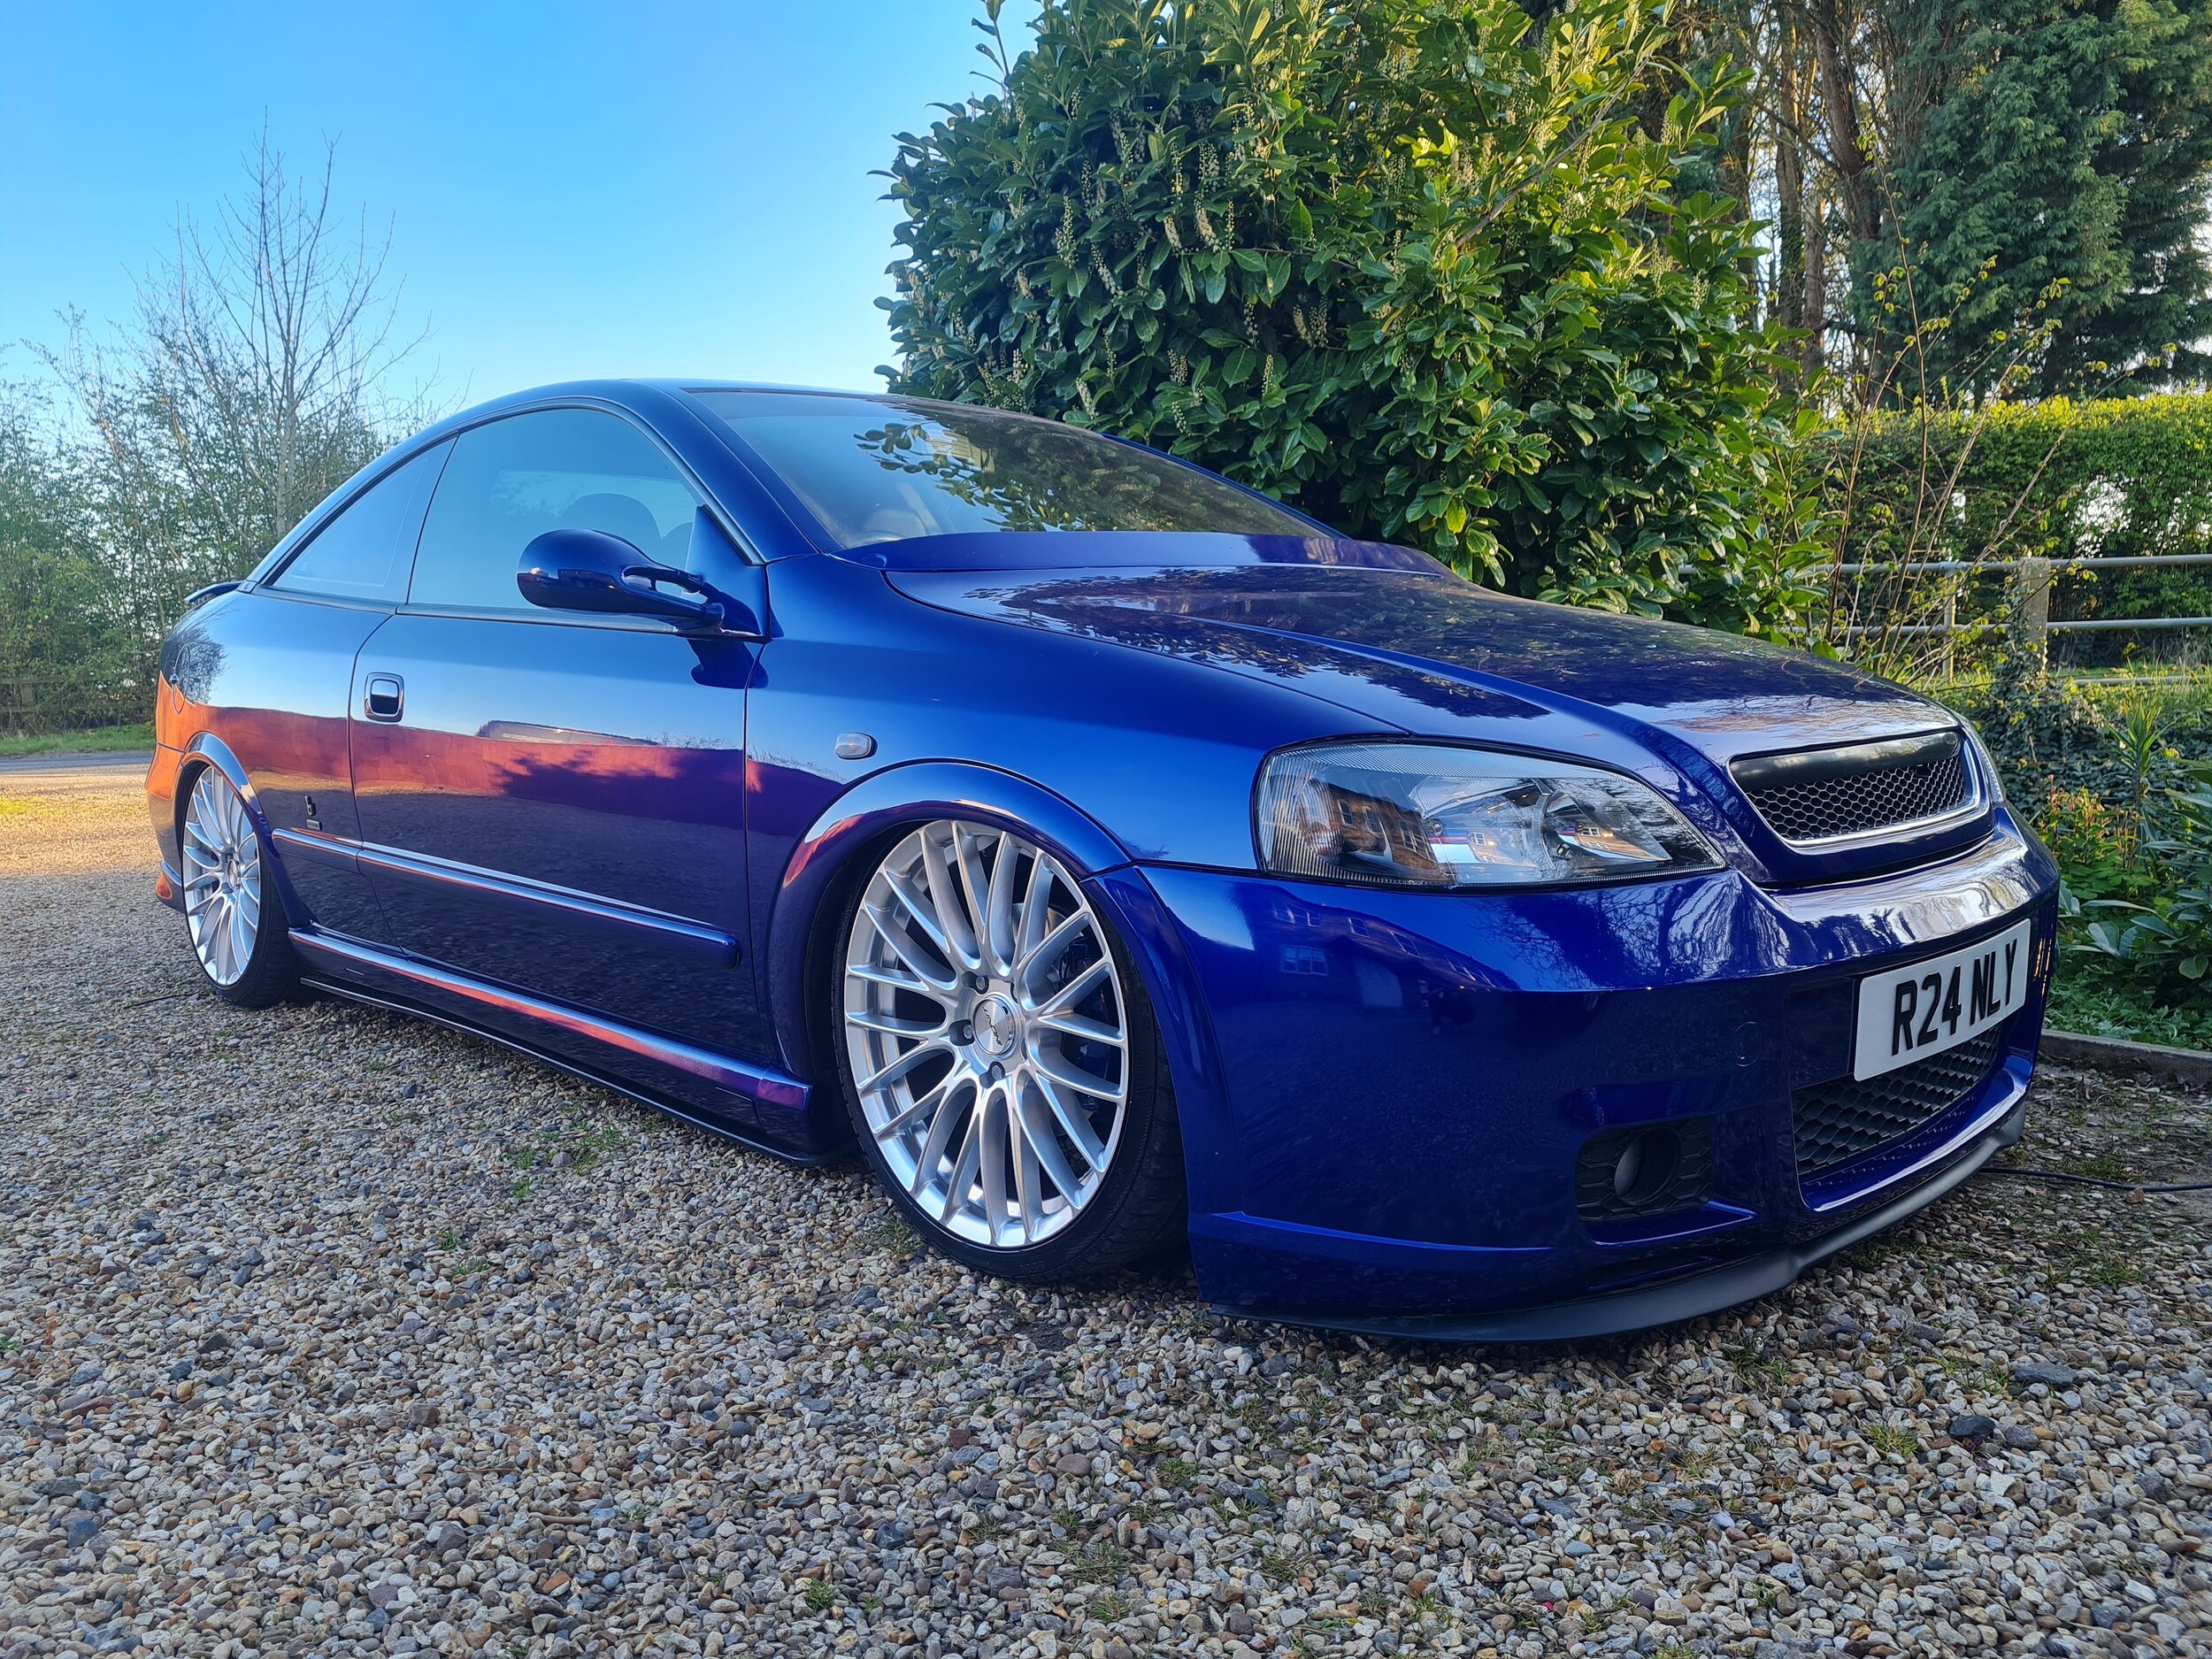 Blue modified Vauxhall Astra 100 edition photo from a low angle.jpg